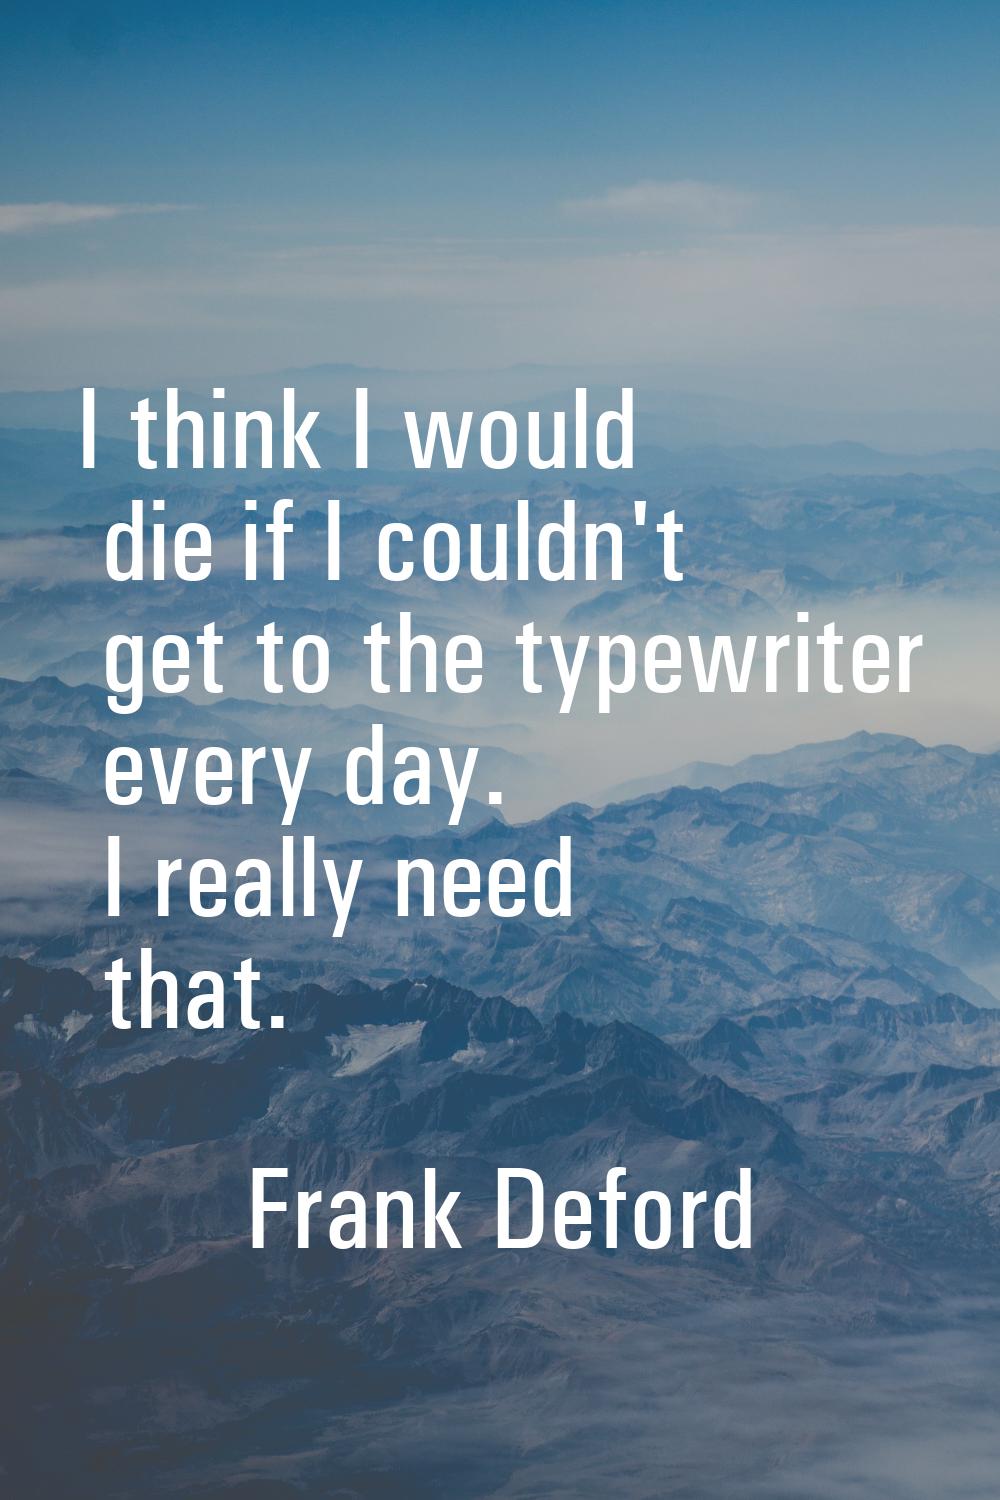 I think I would die if I couldn't get to the typewriter every day. I really need that.